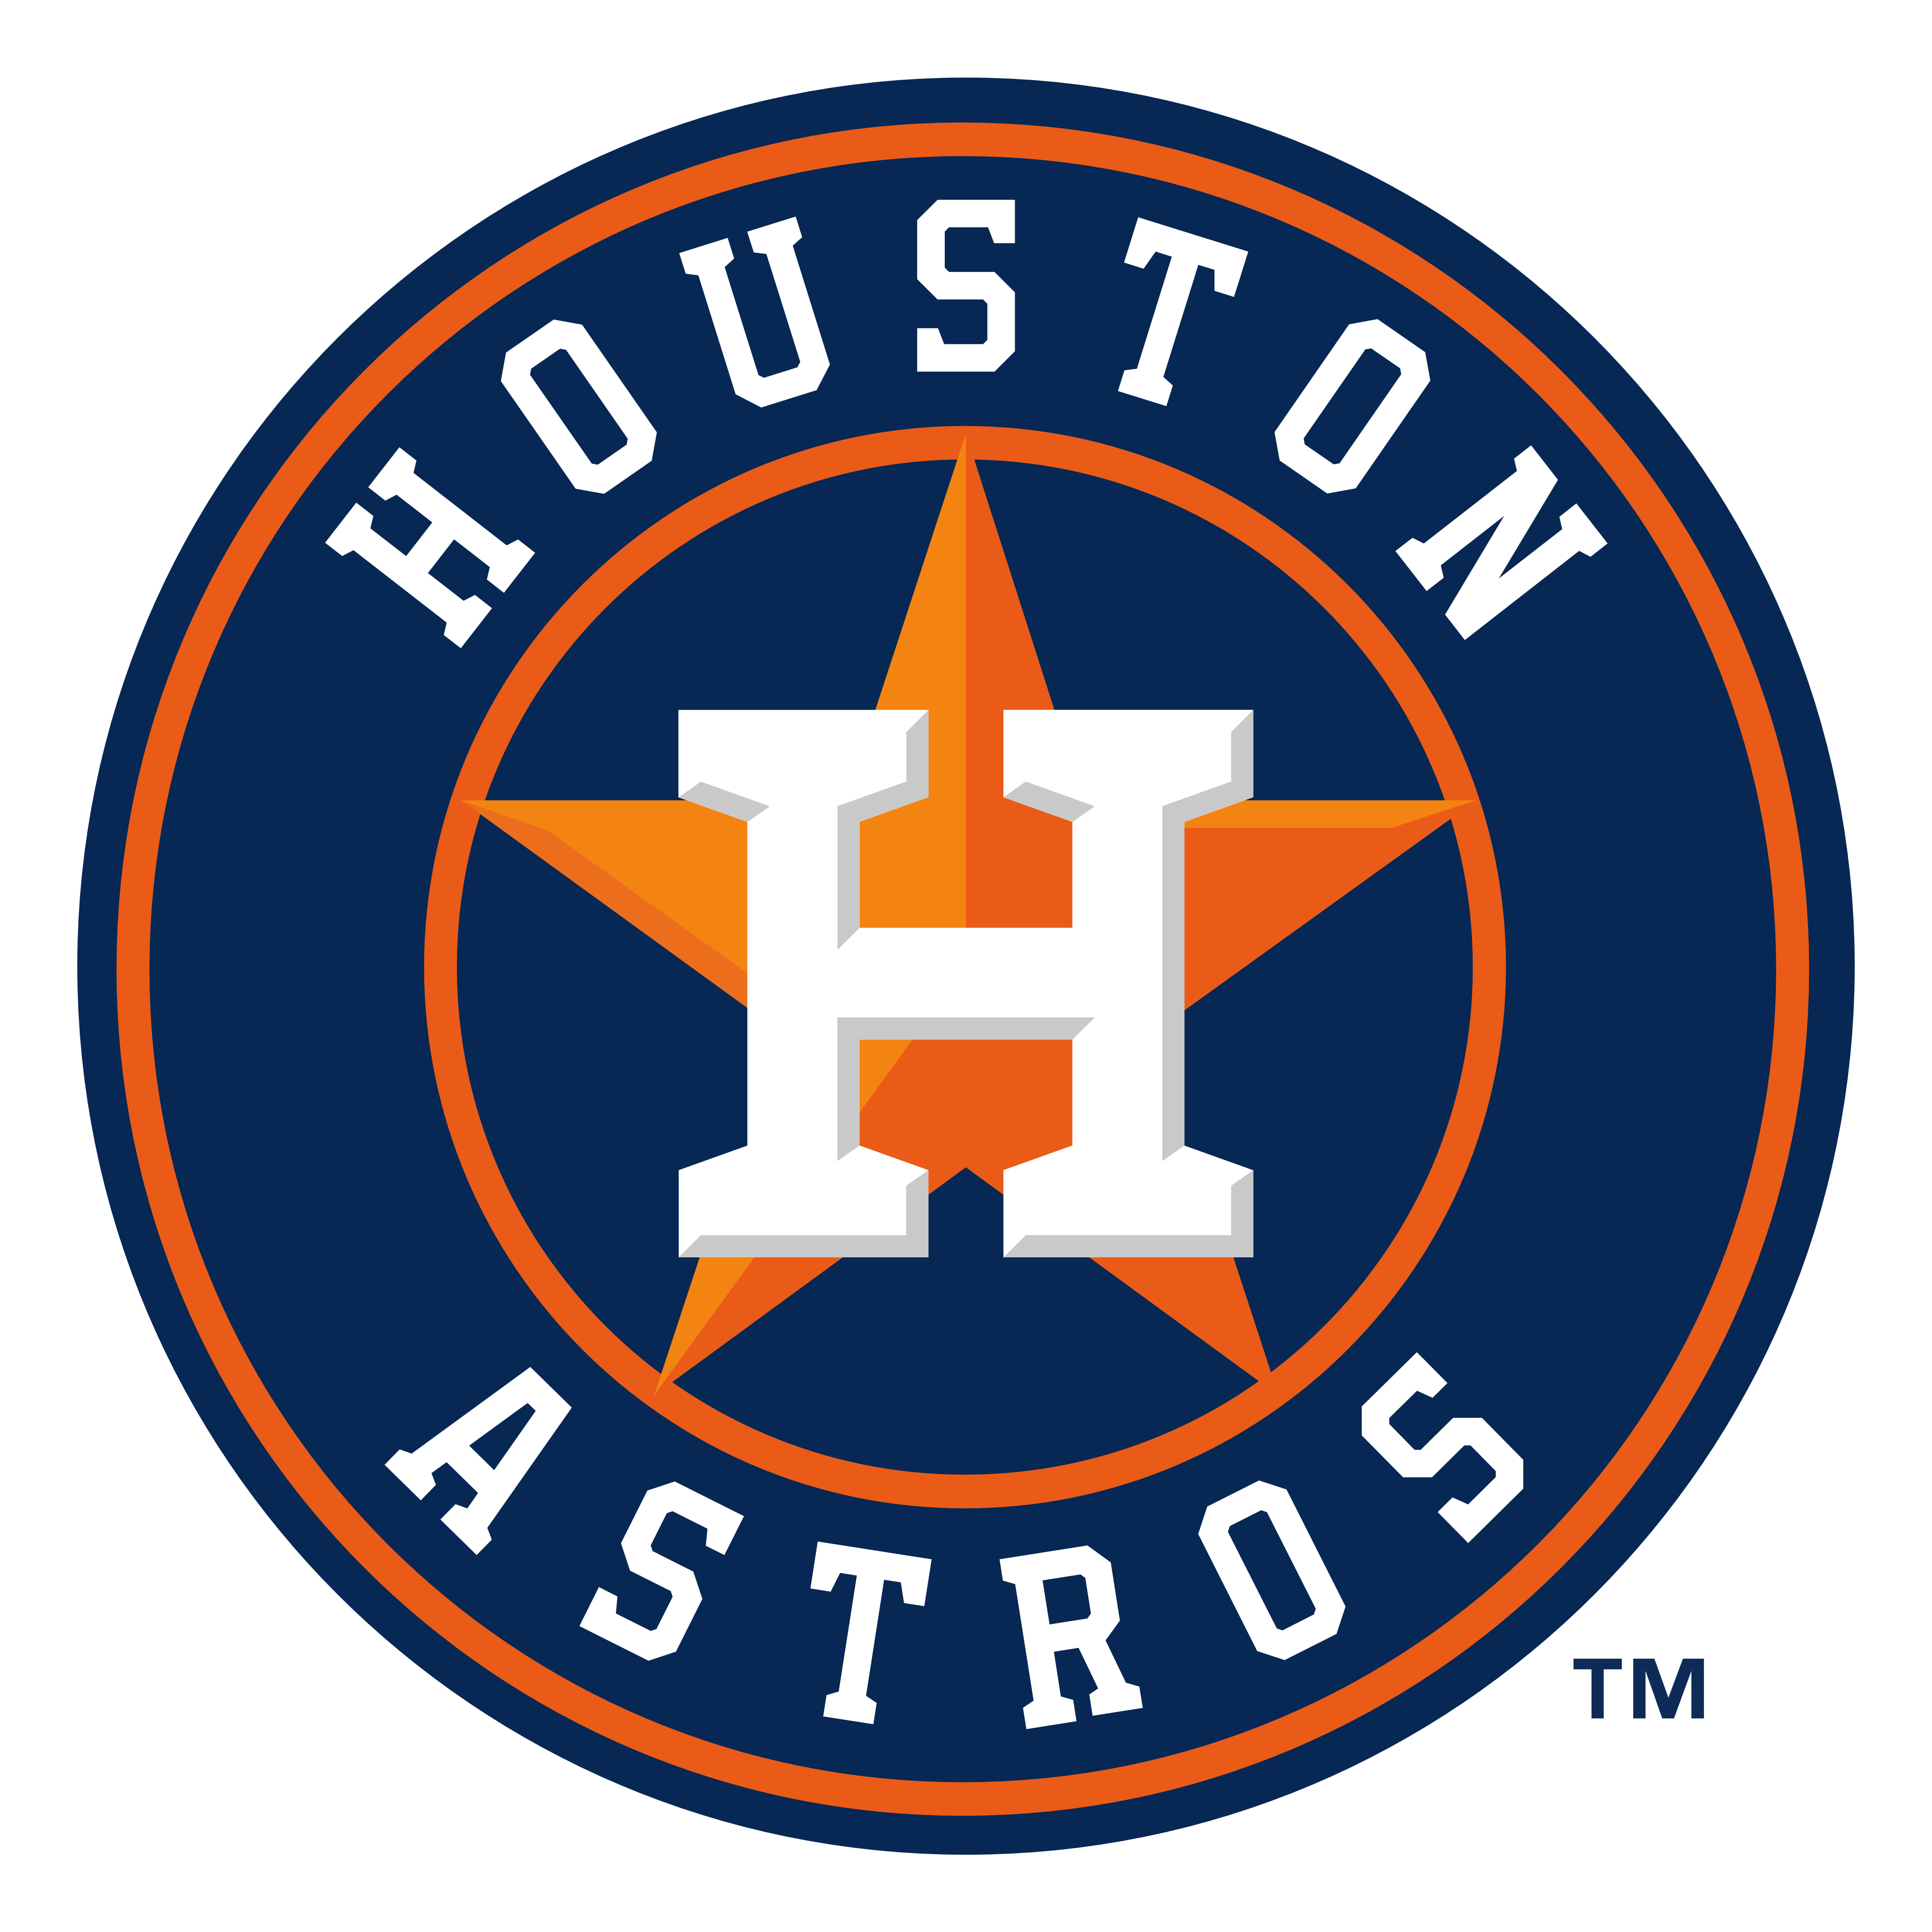 astros images free download